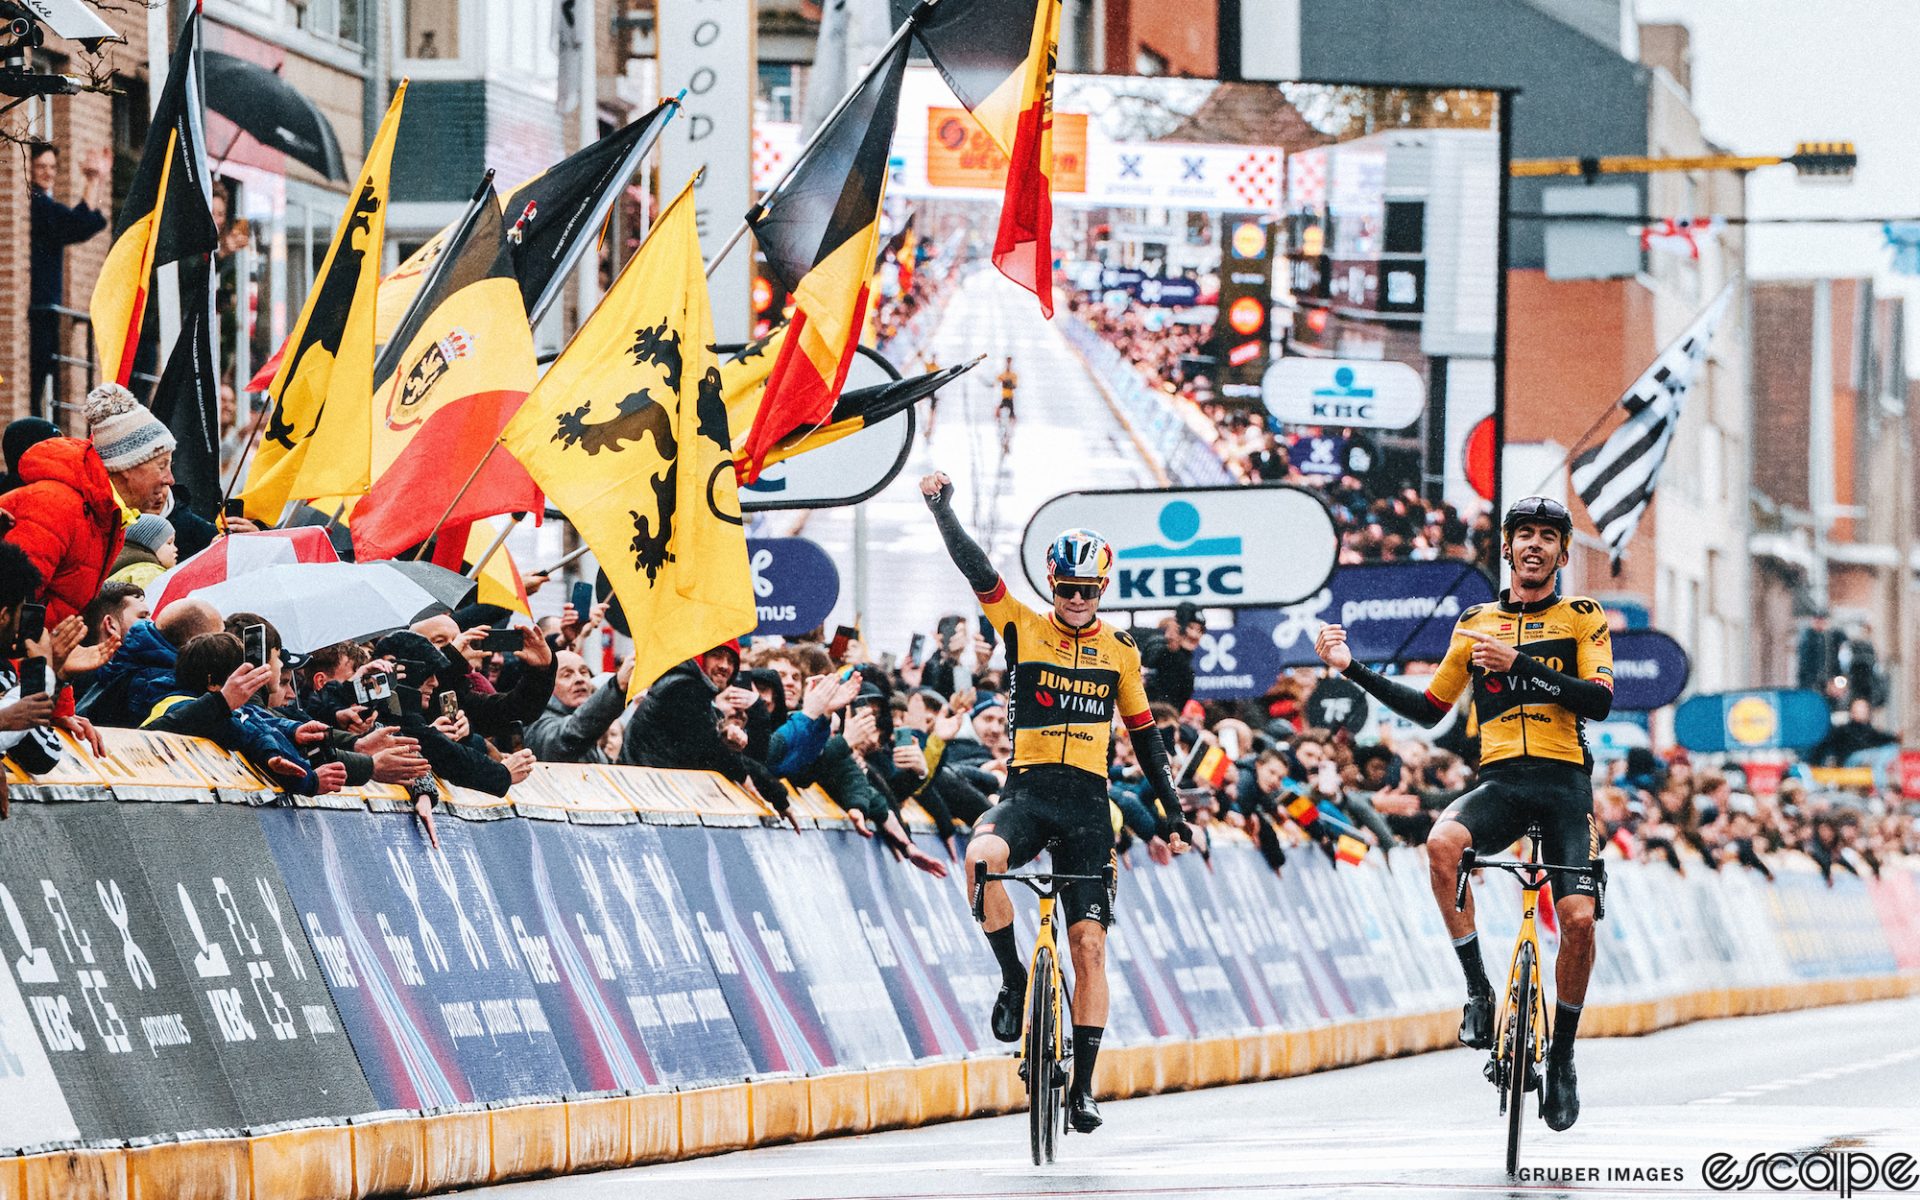 Christophe Laporte and Wout van Aert go 1-2 at the 2023 Gent-Wevelgem. The pair is crossing the finish line well in front of the chase. Wout has a fist in the air while Laporte is pointing to his teammate.